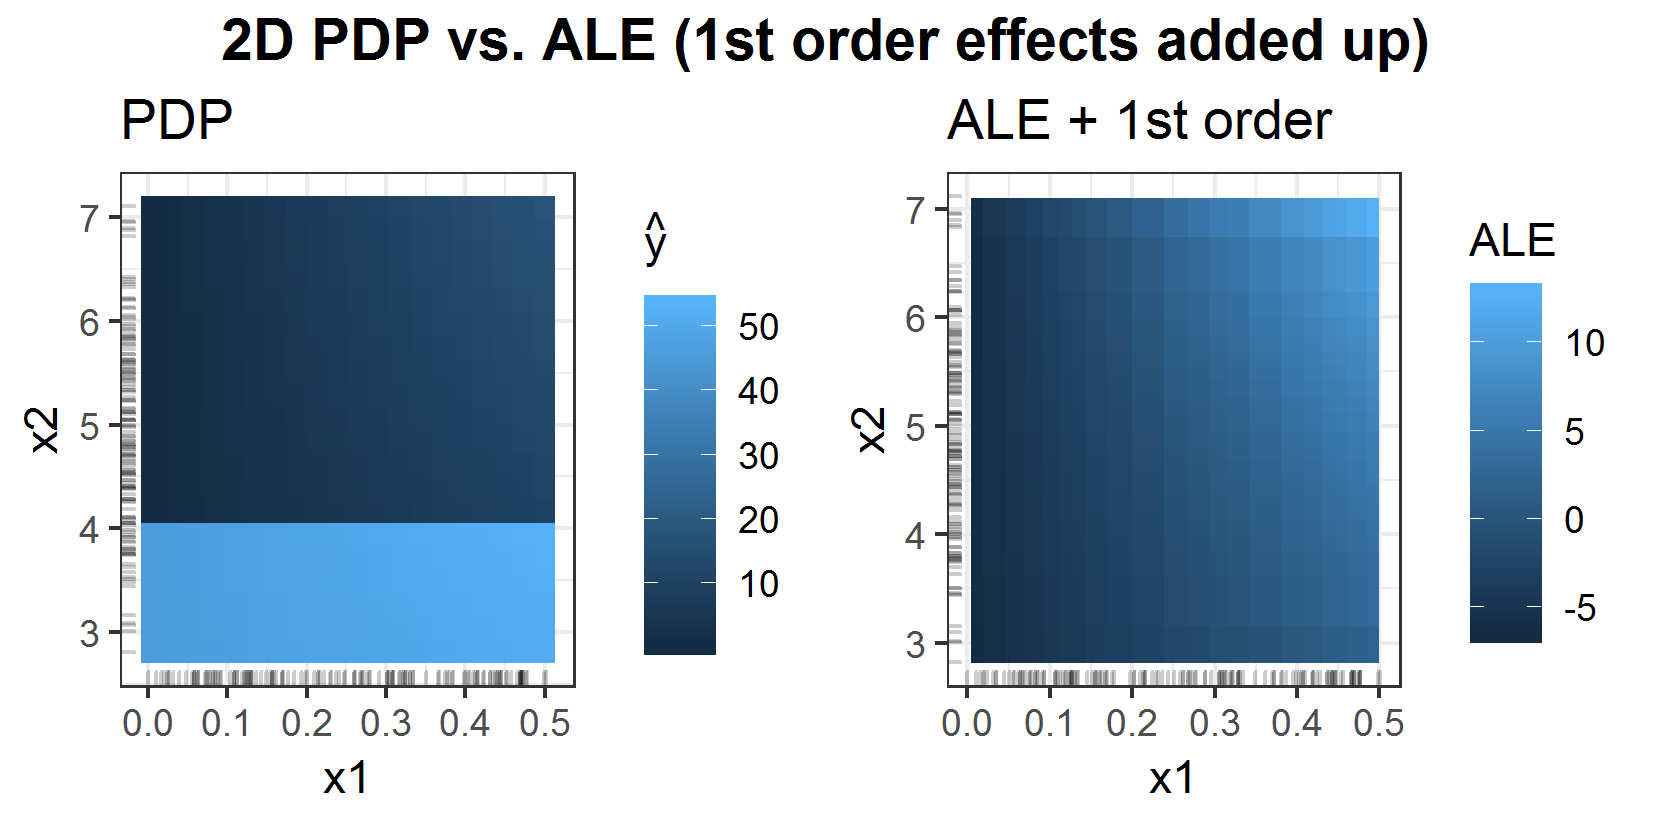 2D PDP vs 2D ALE with added up 1st order effects of features \(x_1\) and \(x_2\) for stepwise prediction function.